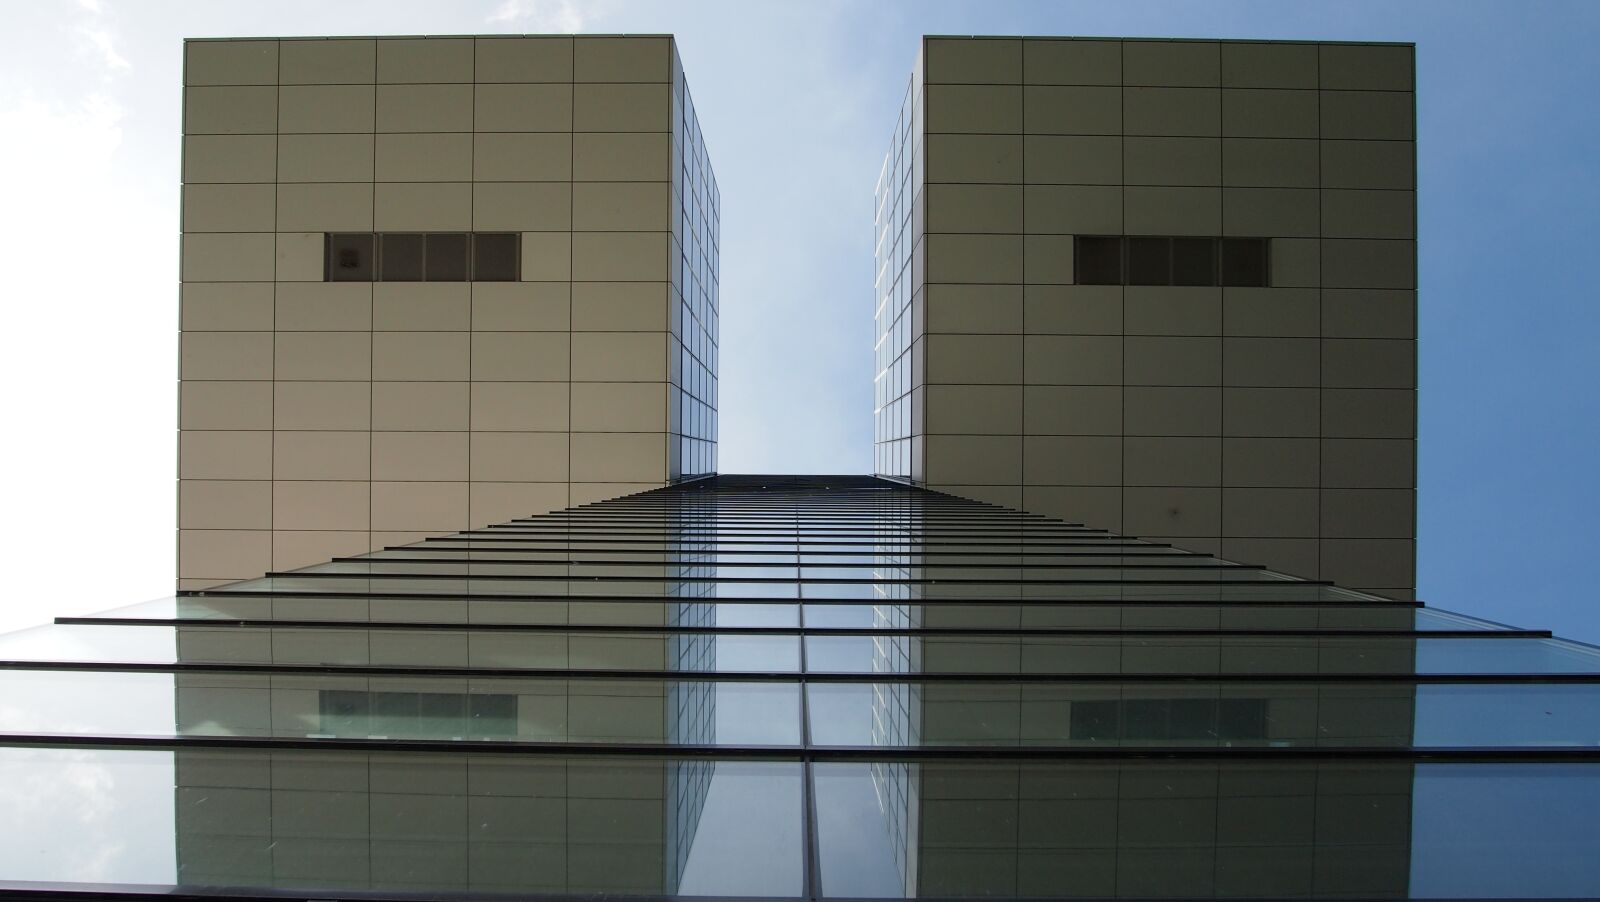 Olympus PEN E-PL3 sample photo. Architecture, glass, modern photography